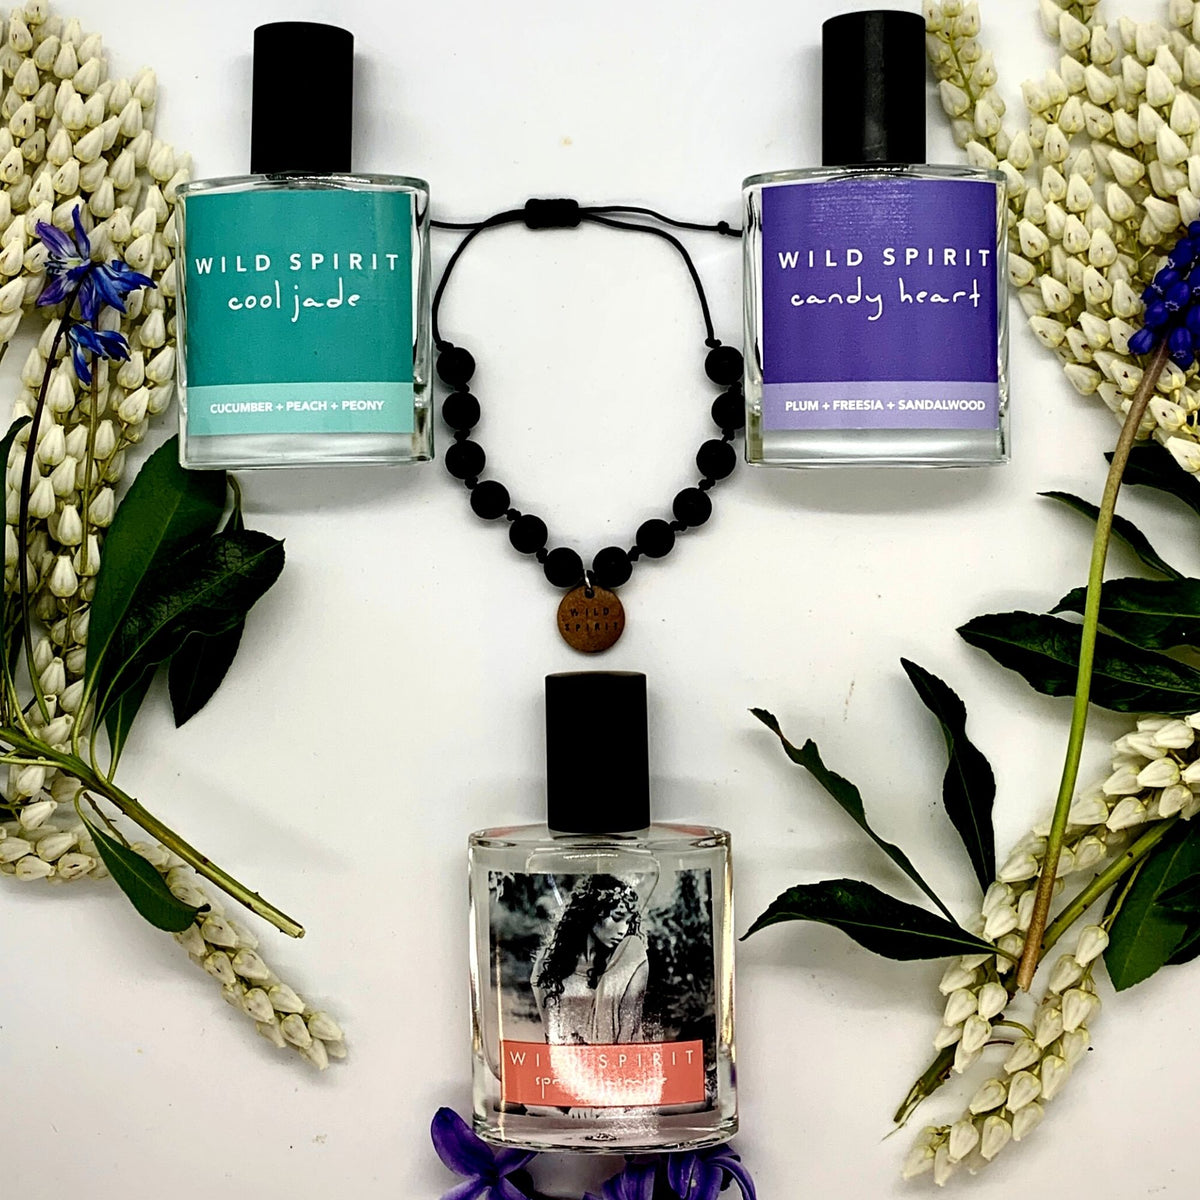 The Wild Spirit Fragrances Flower Power Perfume Collection gives flowers for Mother&#39;s Day a whole new meaning, with something different she can enjoy every day.   With Spring Jasmine, Candy Heart, Cool Jade, and a Lava Bead Bracelet, this fresh take on flowers for Mom is feminine, sassy, and uplifting just like her!